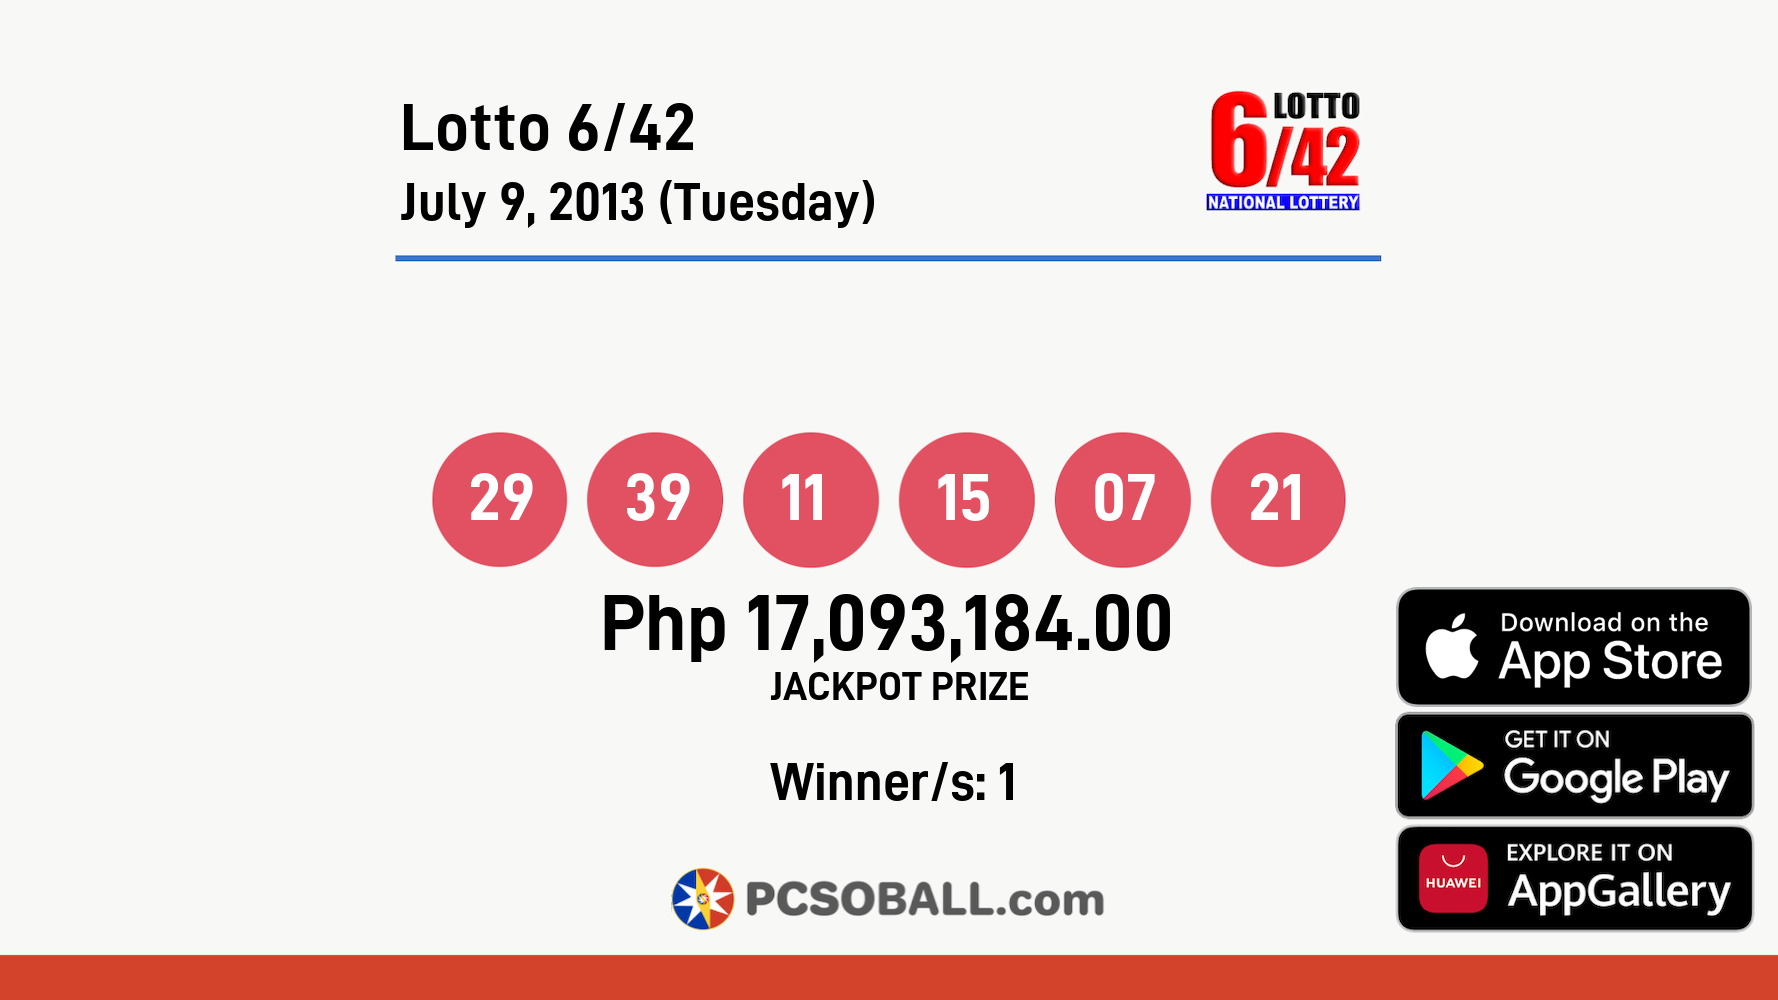 Lotto 6/42 July 9, 2013 (Tuesday) Result